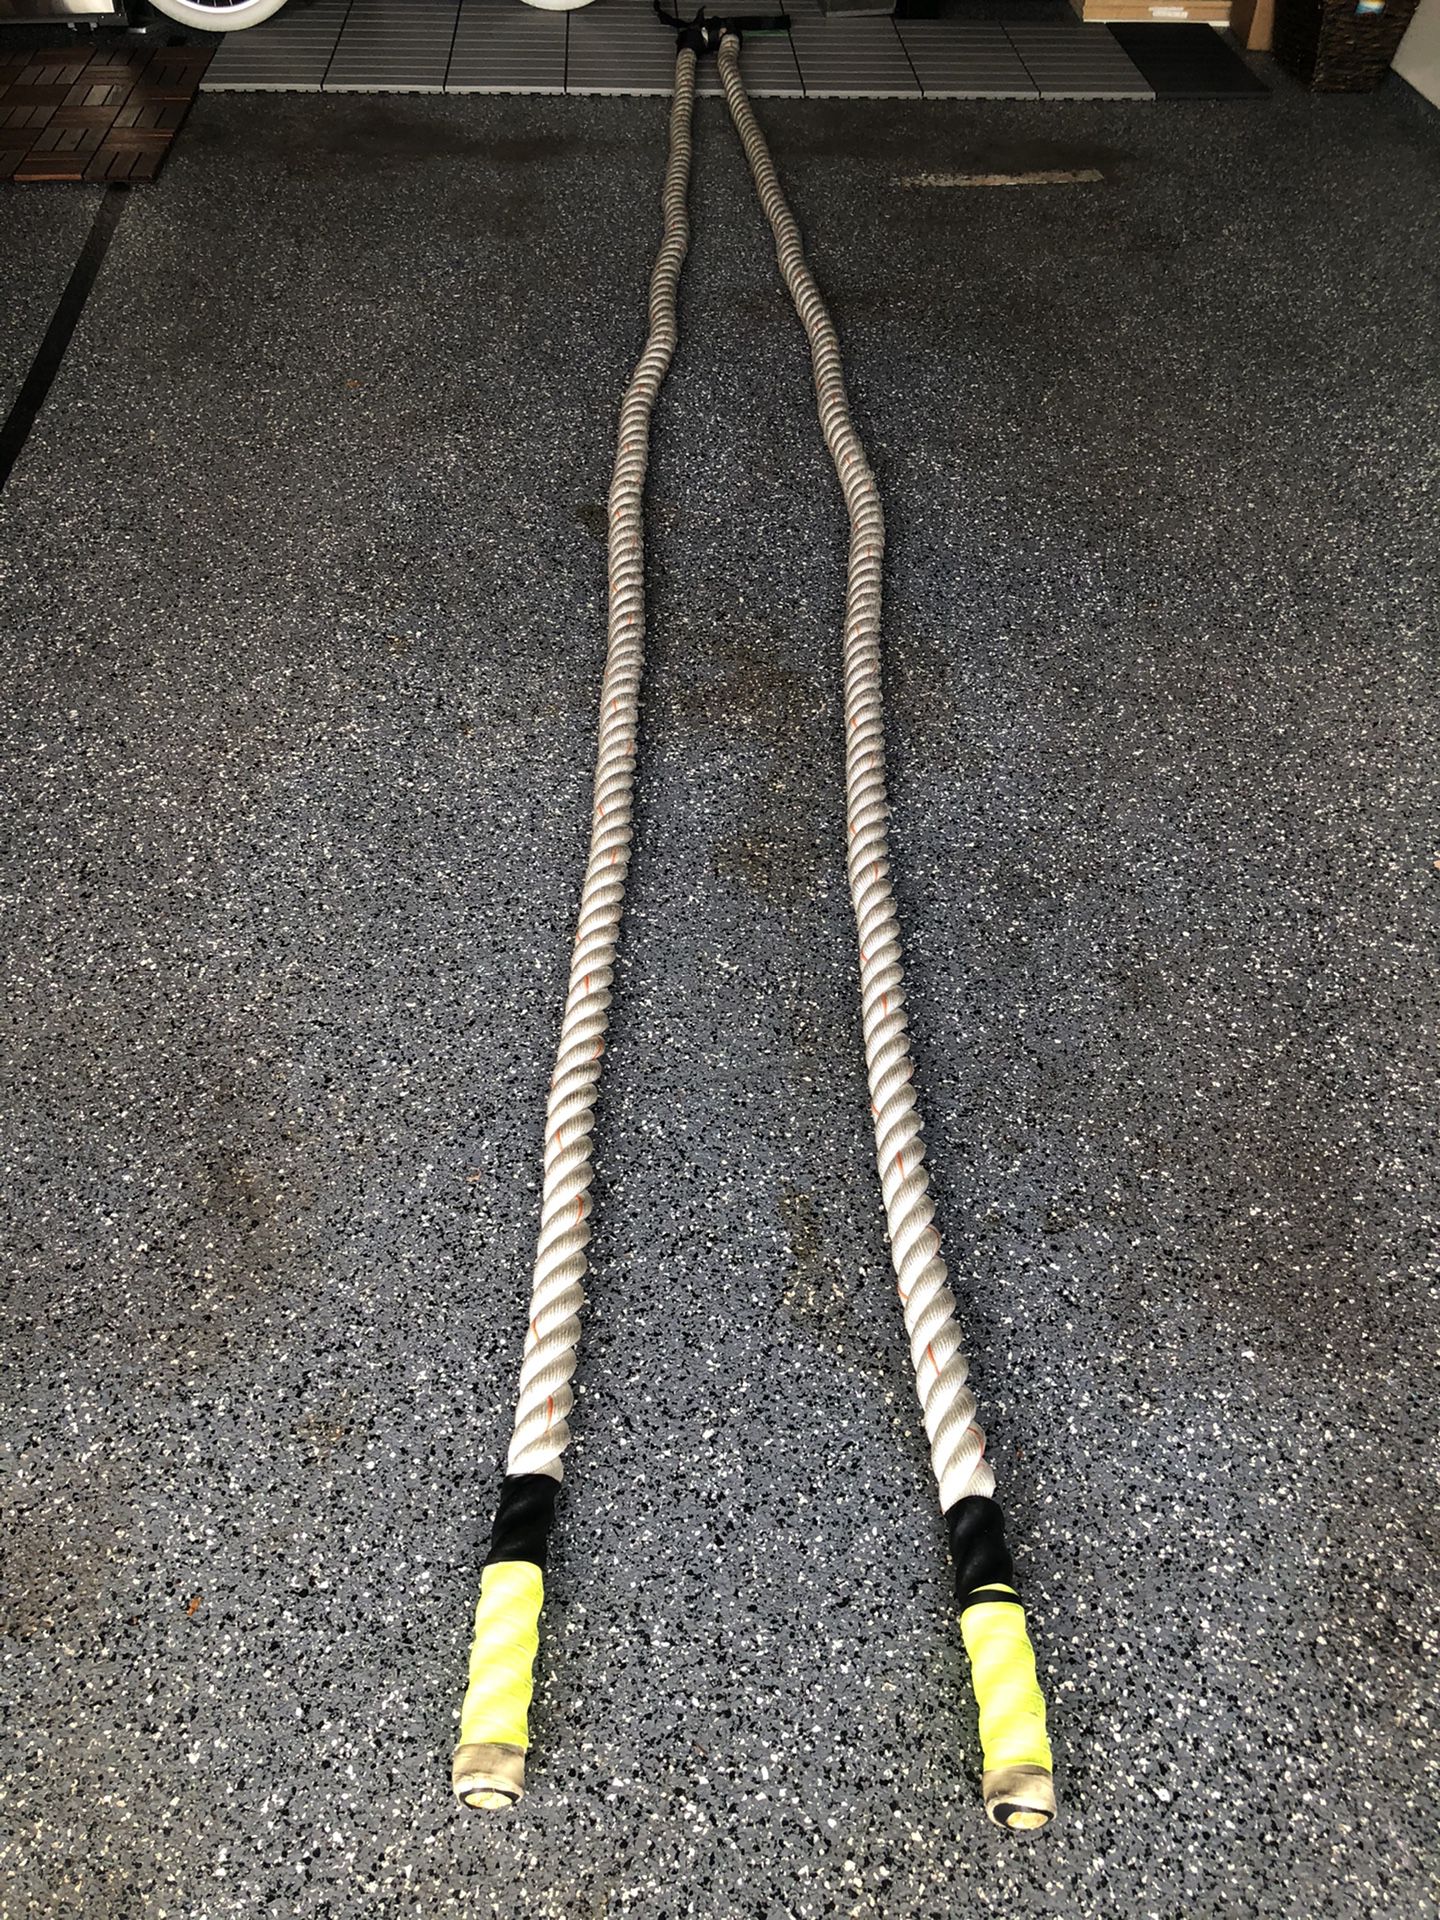 Battle Ropes (Undulating ropes) for CrossFit in Your Home Gym - 2” thick rope